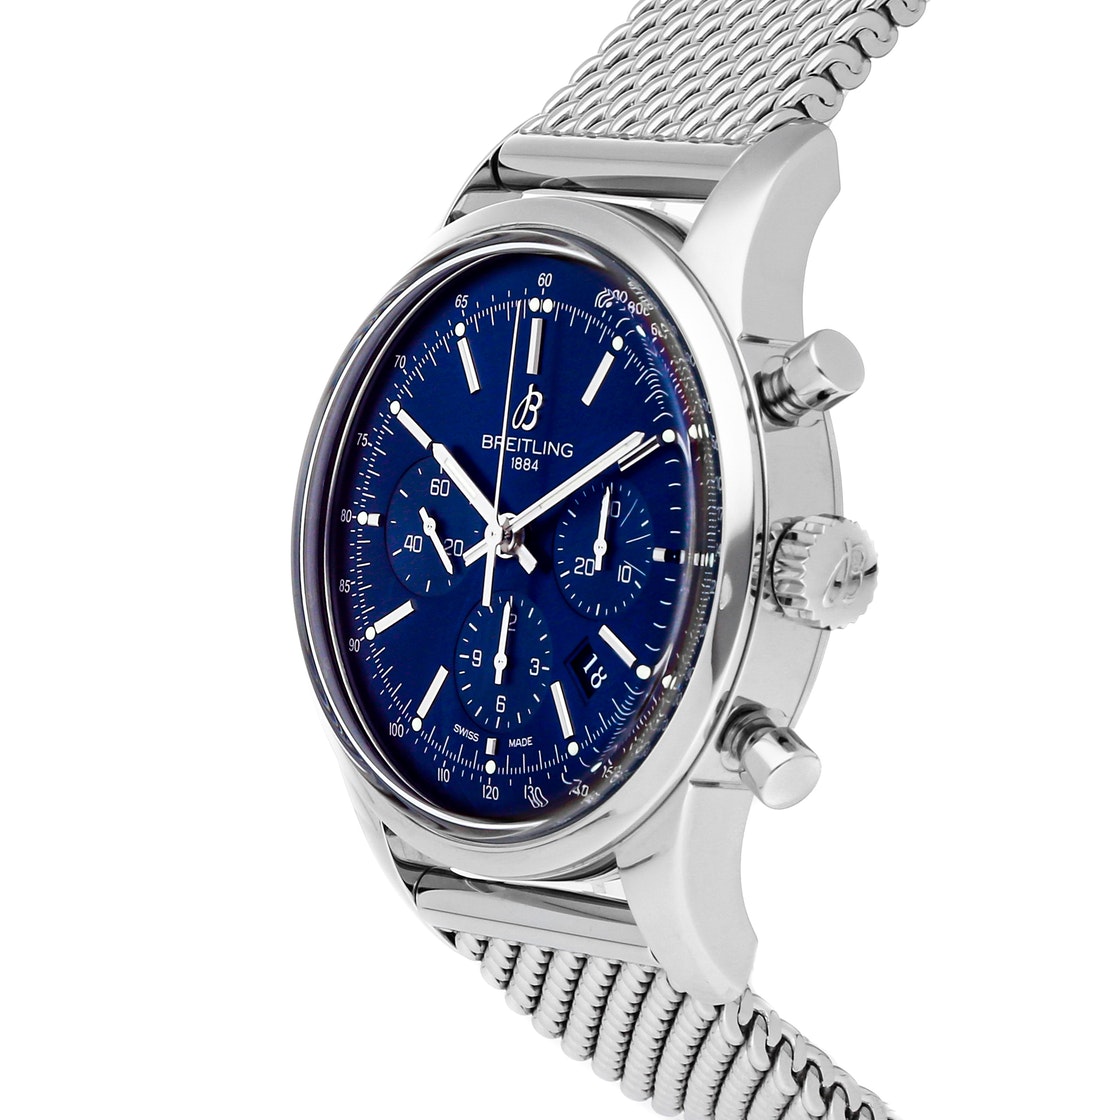 

Breitling Blue Stainless Steel Transocean Chronograph Limited Edition AB015112/C860 Men's Wristwatch 43 MM